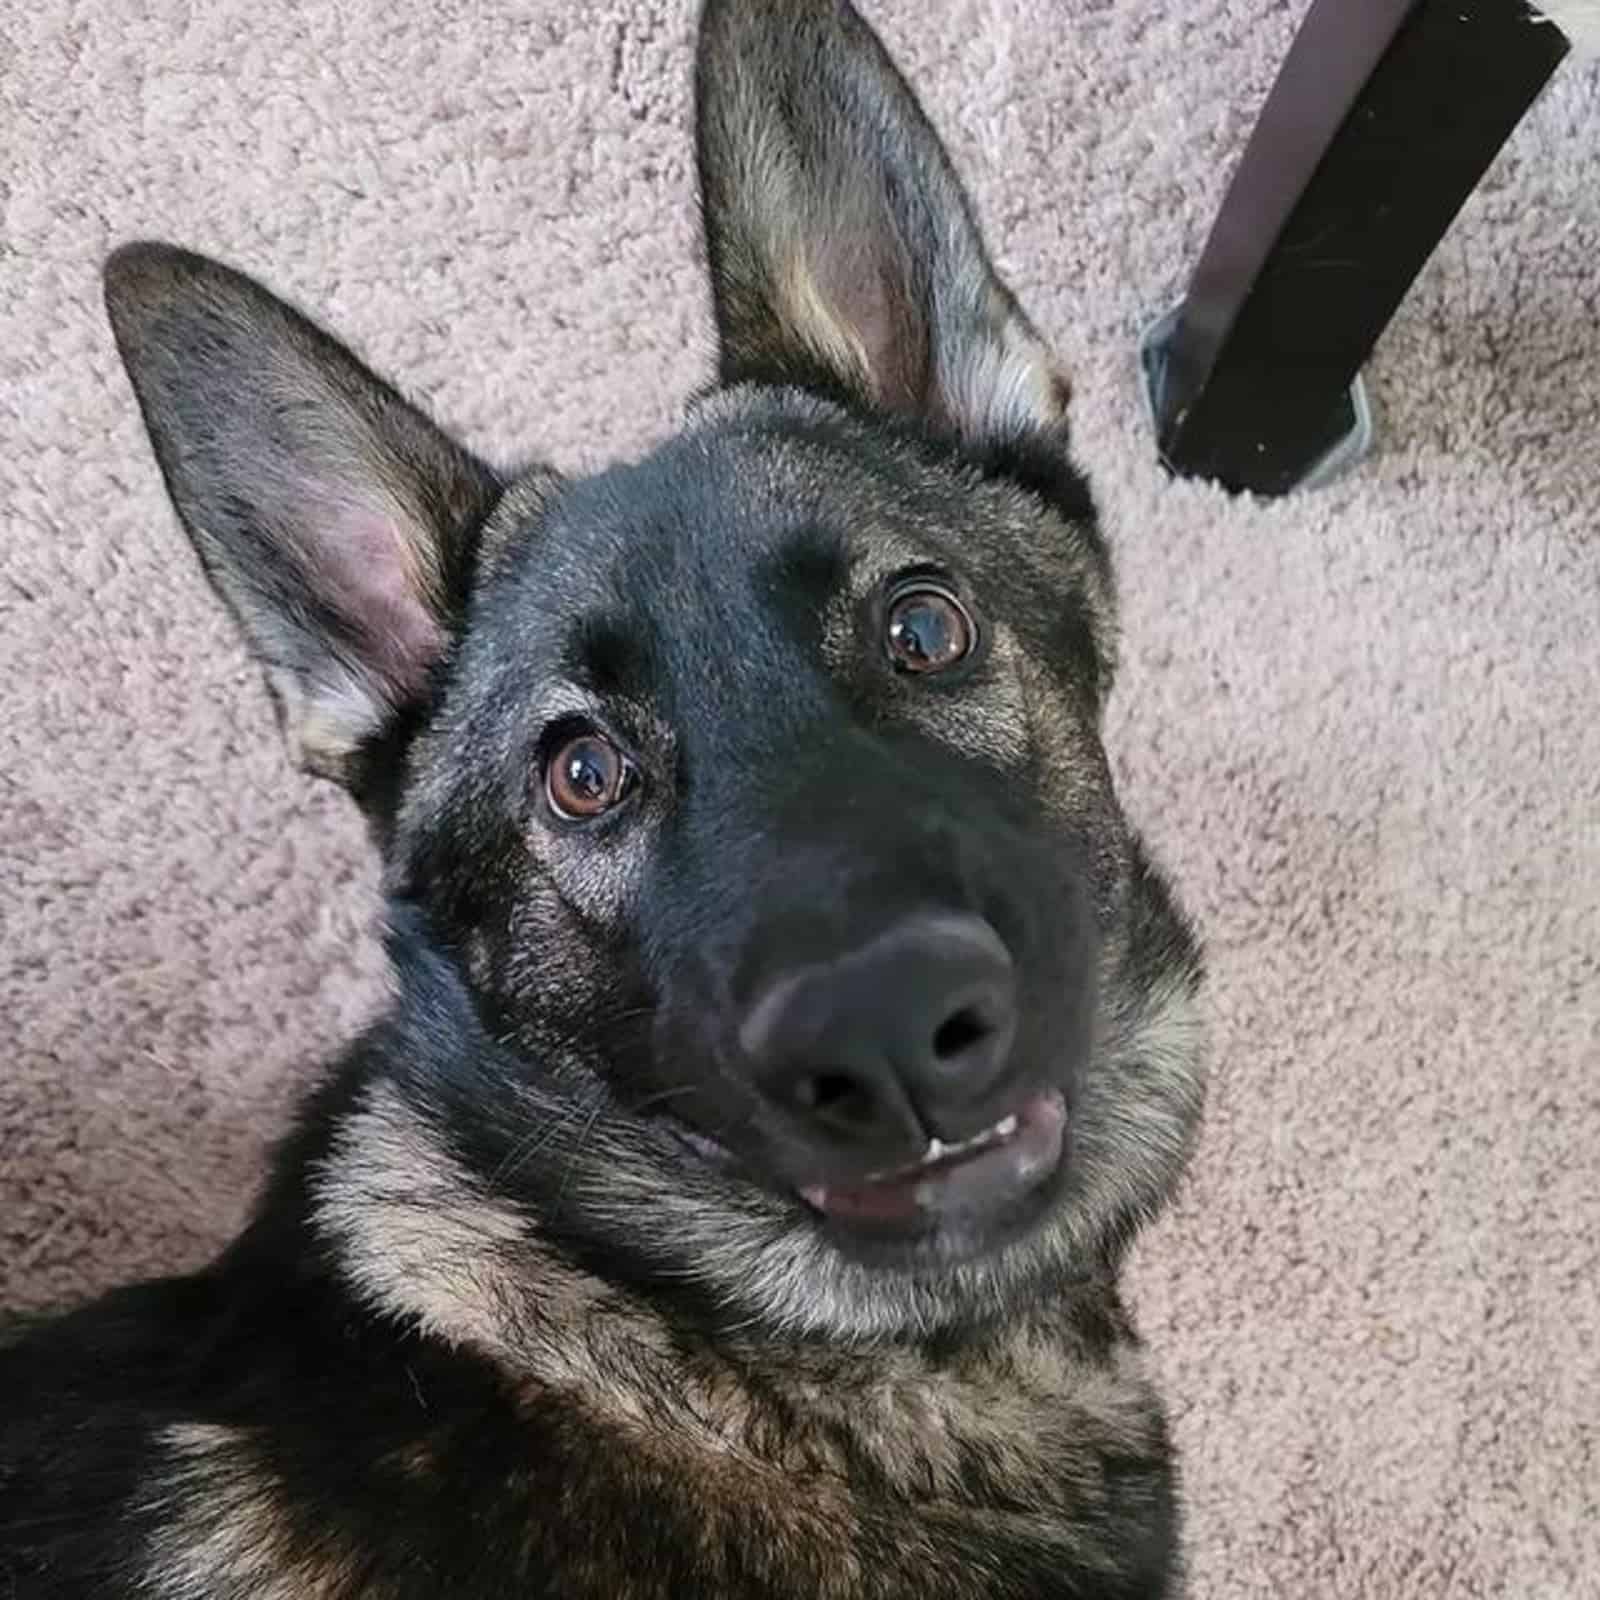 sable german shepherd dog looking into camera while lying on the carpet